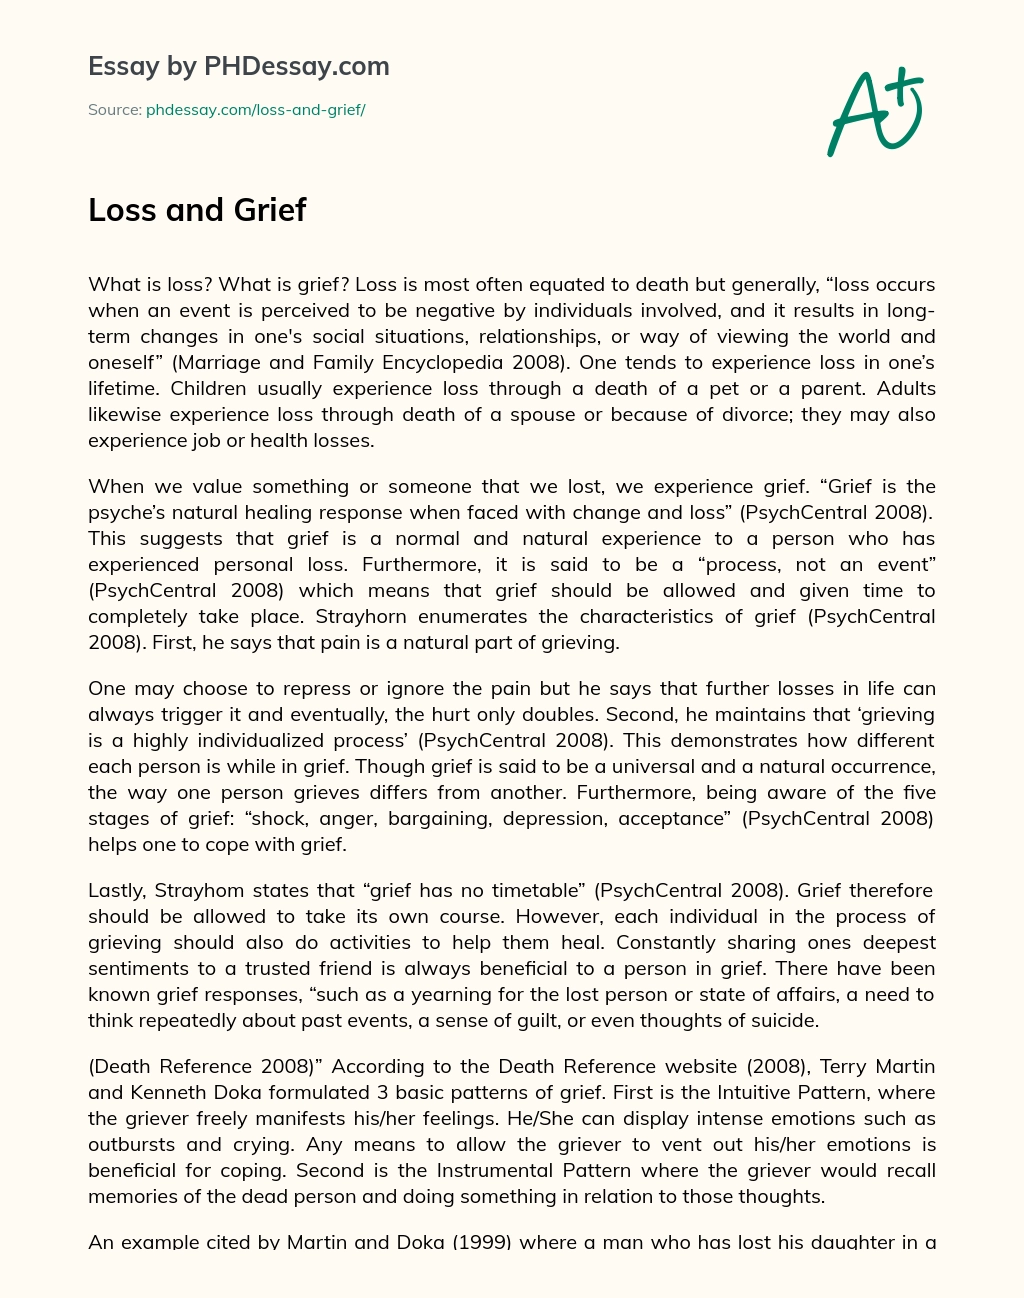 Loss and Grief essay